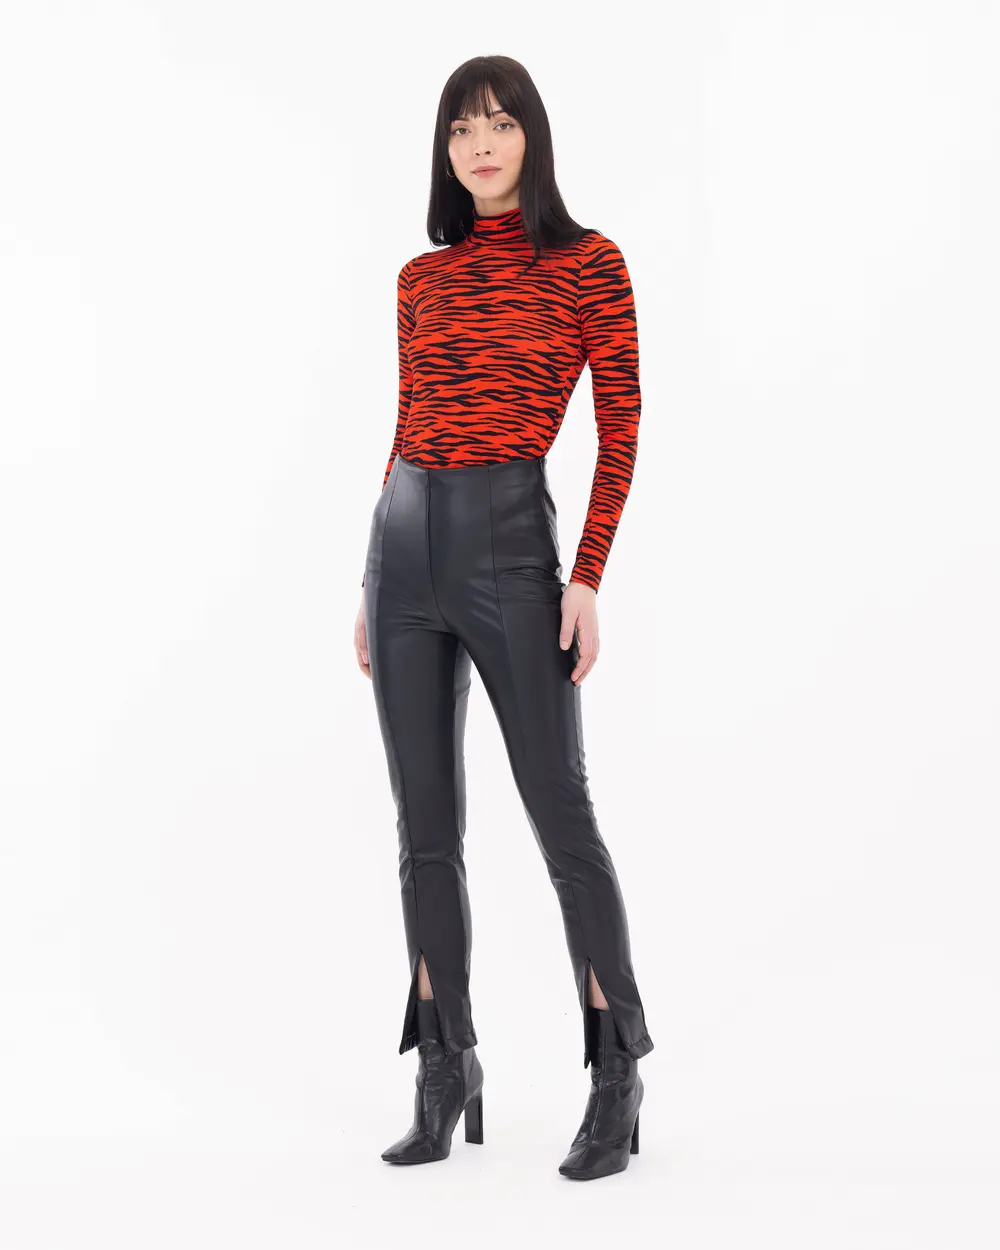 Zebra Patterned Knitted Fabric Blouse